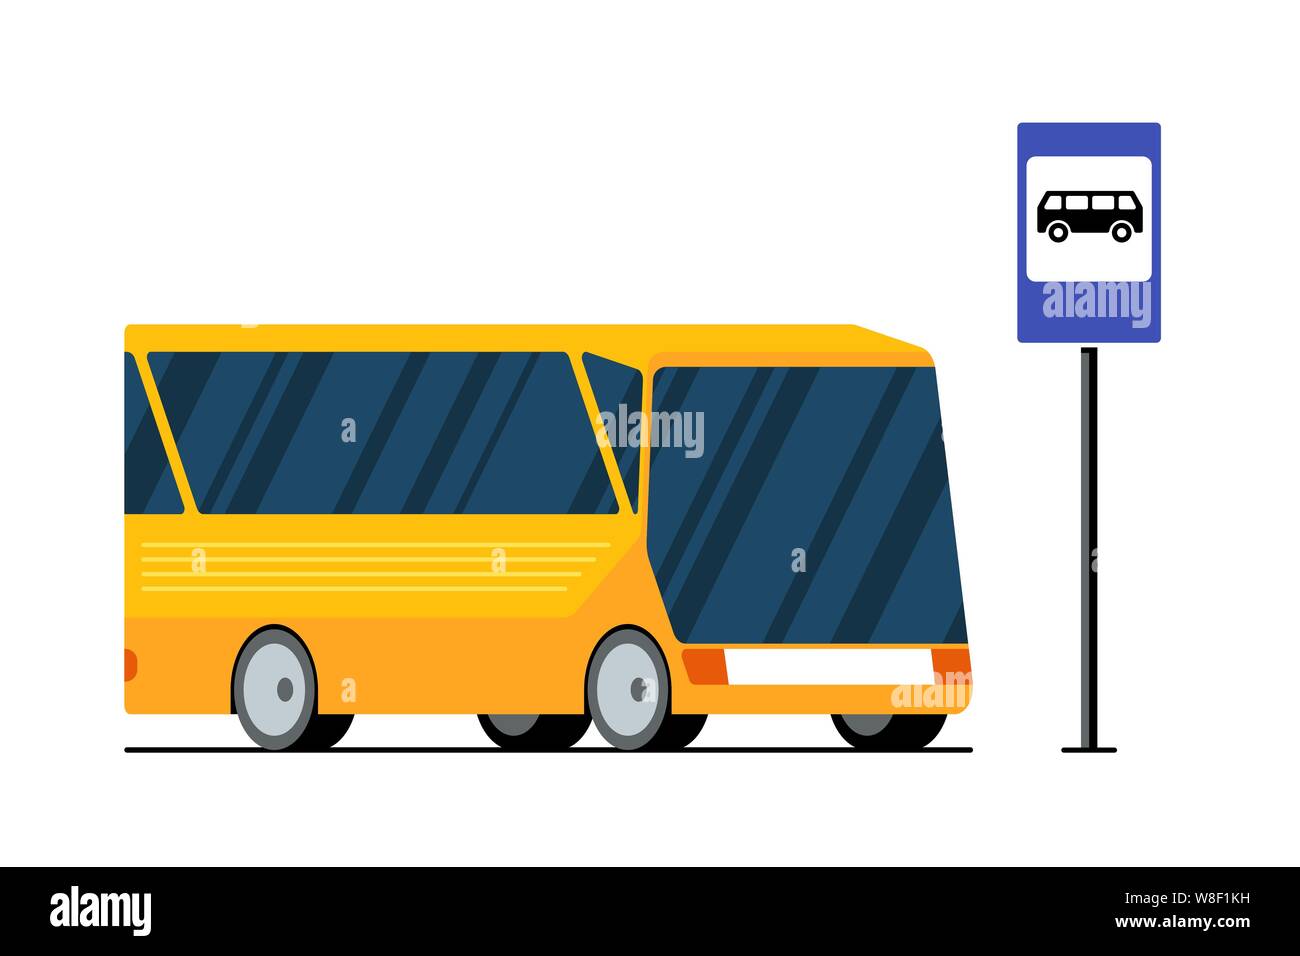 Yellow modern city transport bus on road near bus stop station sign. Vector isolated flat illustration for passenger transportation traffic service vehicle Stock Vector